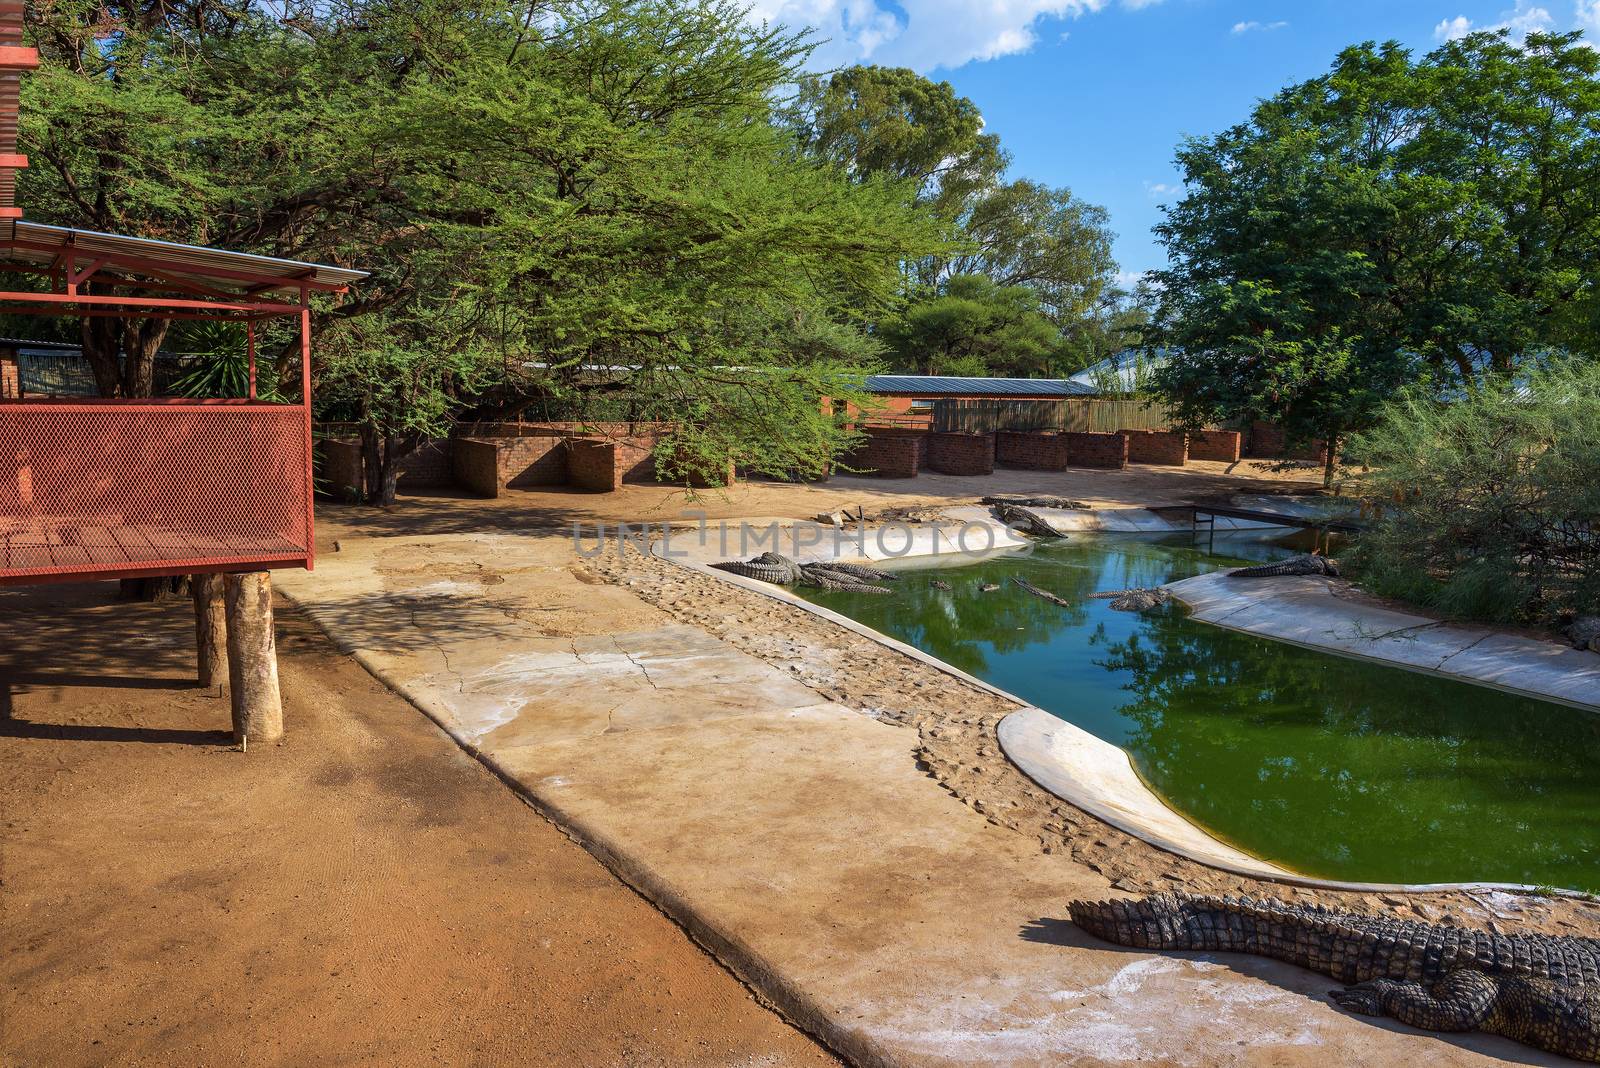 Crocodiles relaxing in an artificial lake at the Crocodile Farm in Namibia by nickfox